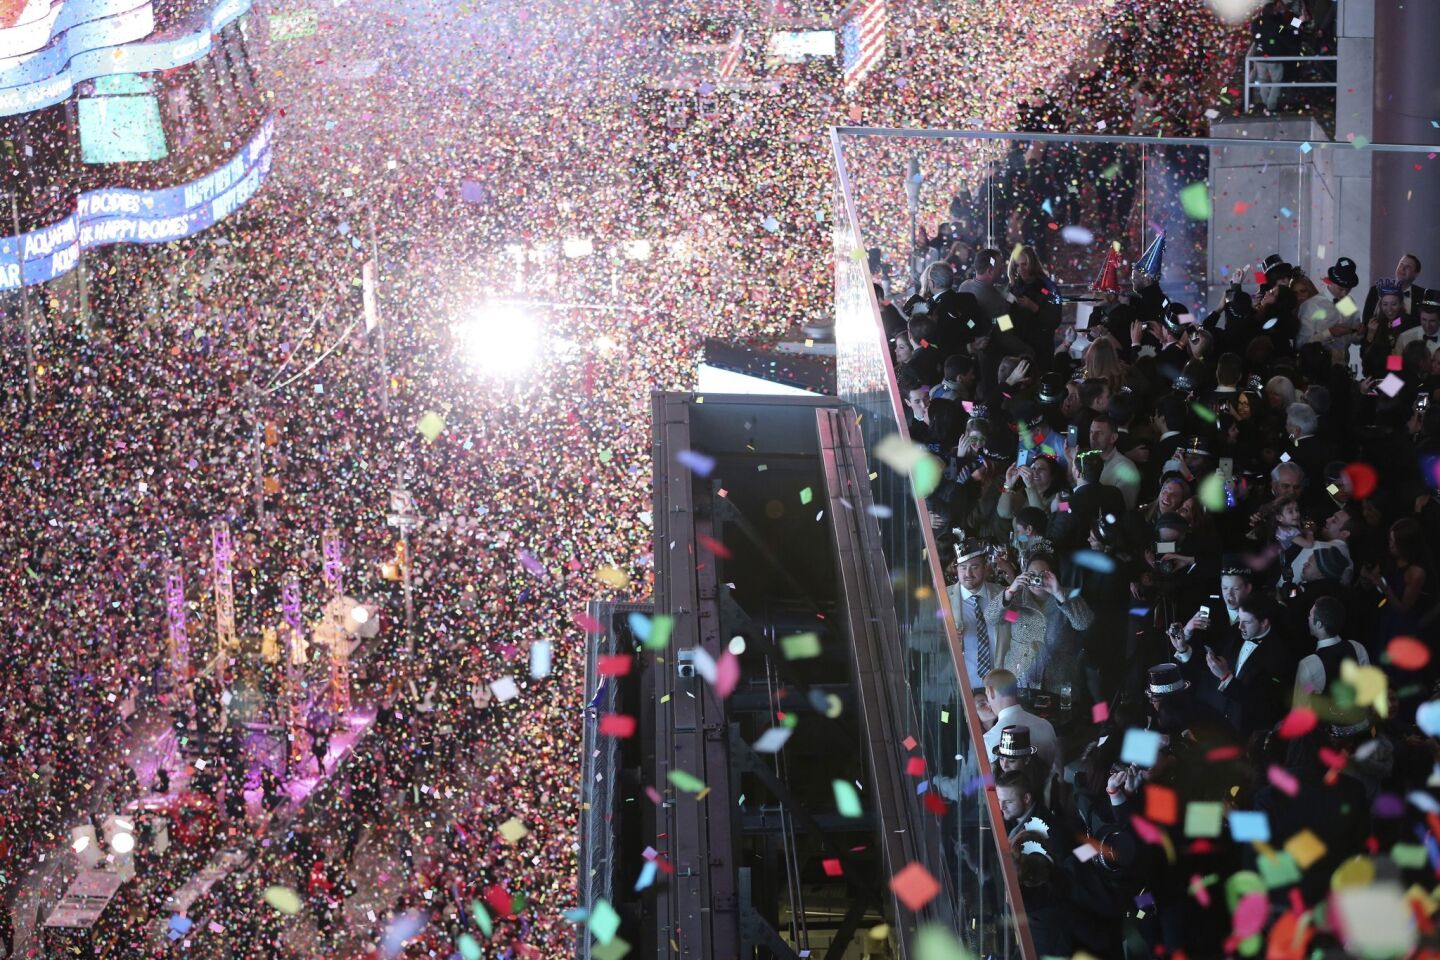 Revelers celebrate as confetti flies over New York's Times Square after the clock strikes midnight during the New Year's Eve celebration as seen from the New York Marriott Marquis hotel.